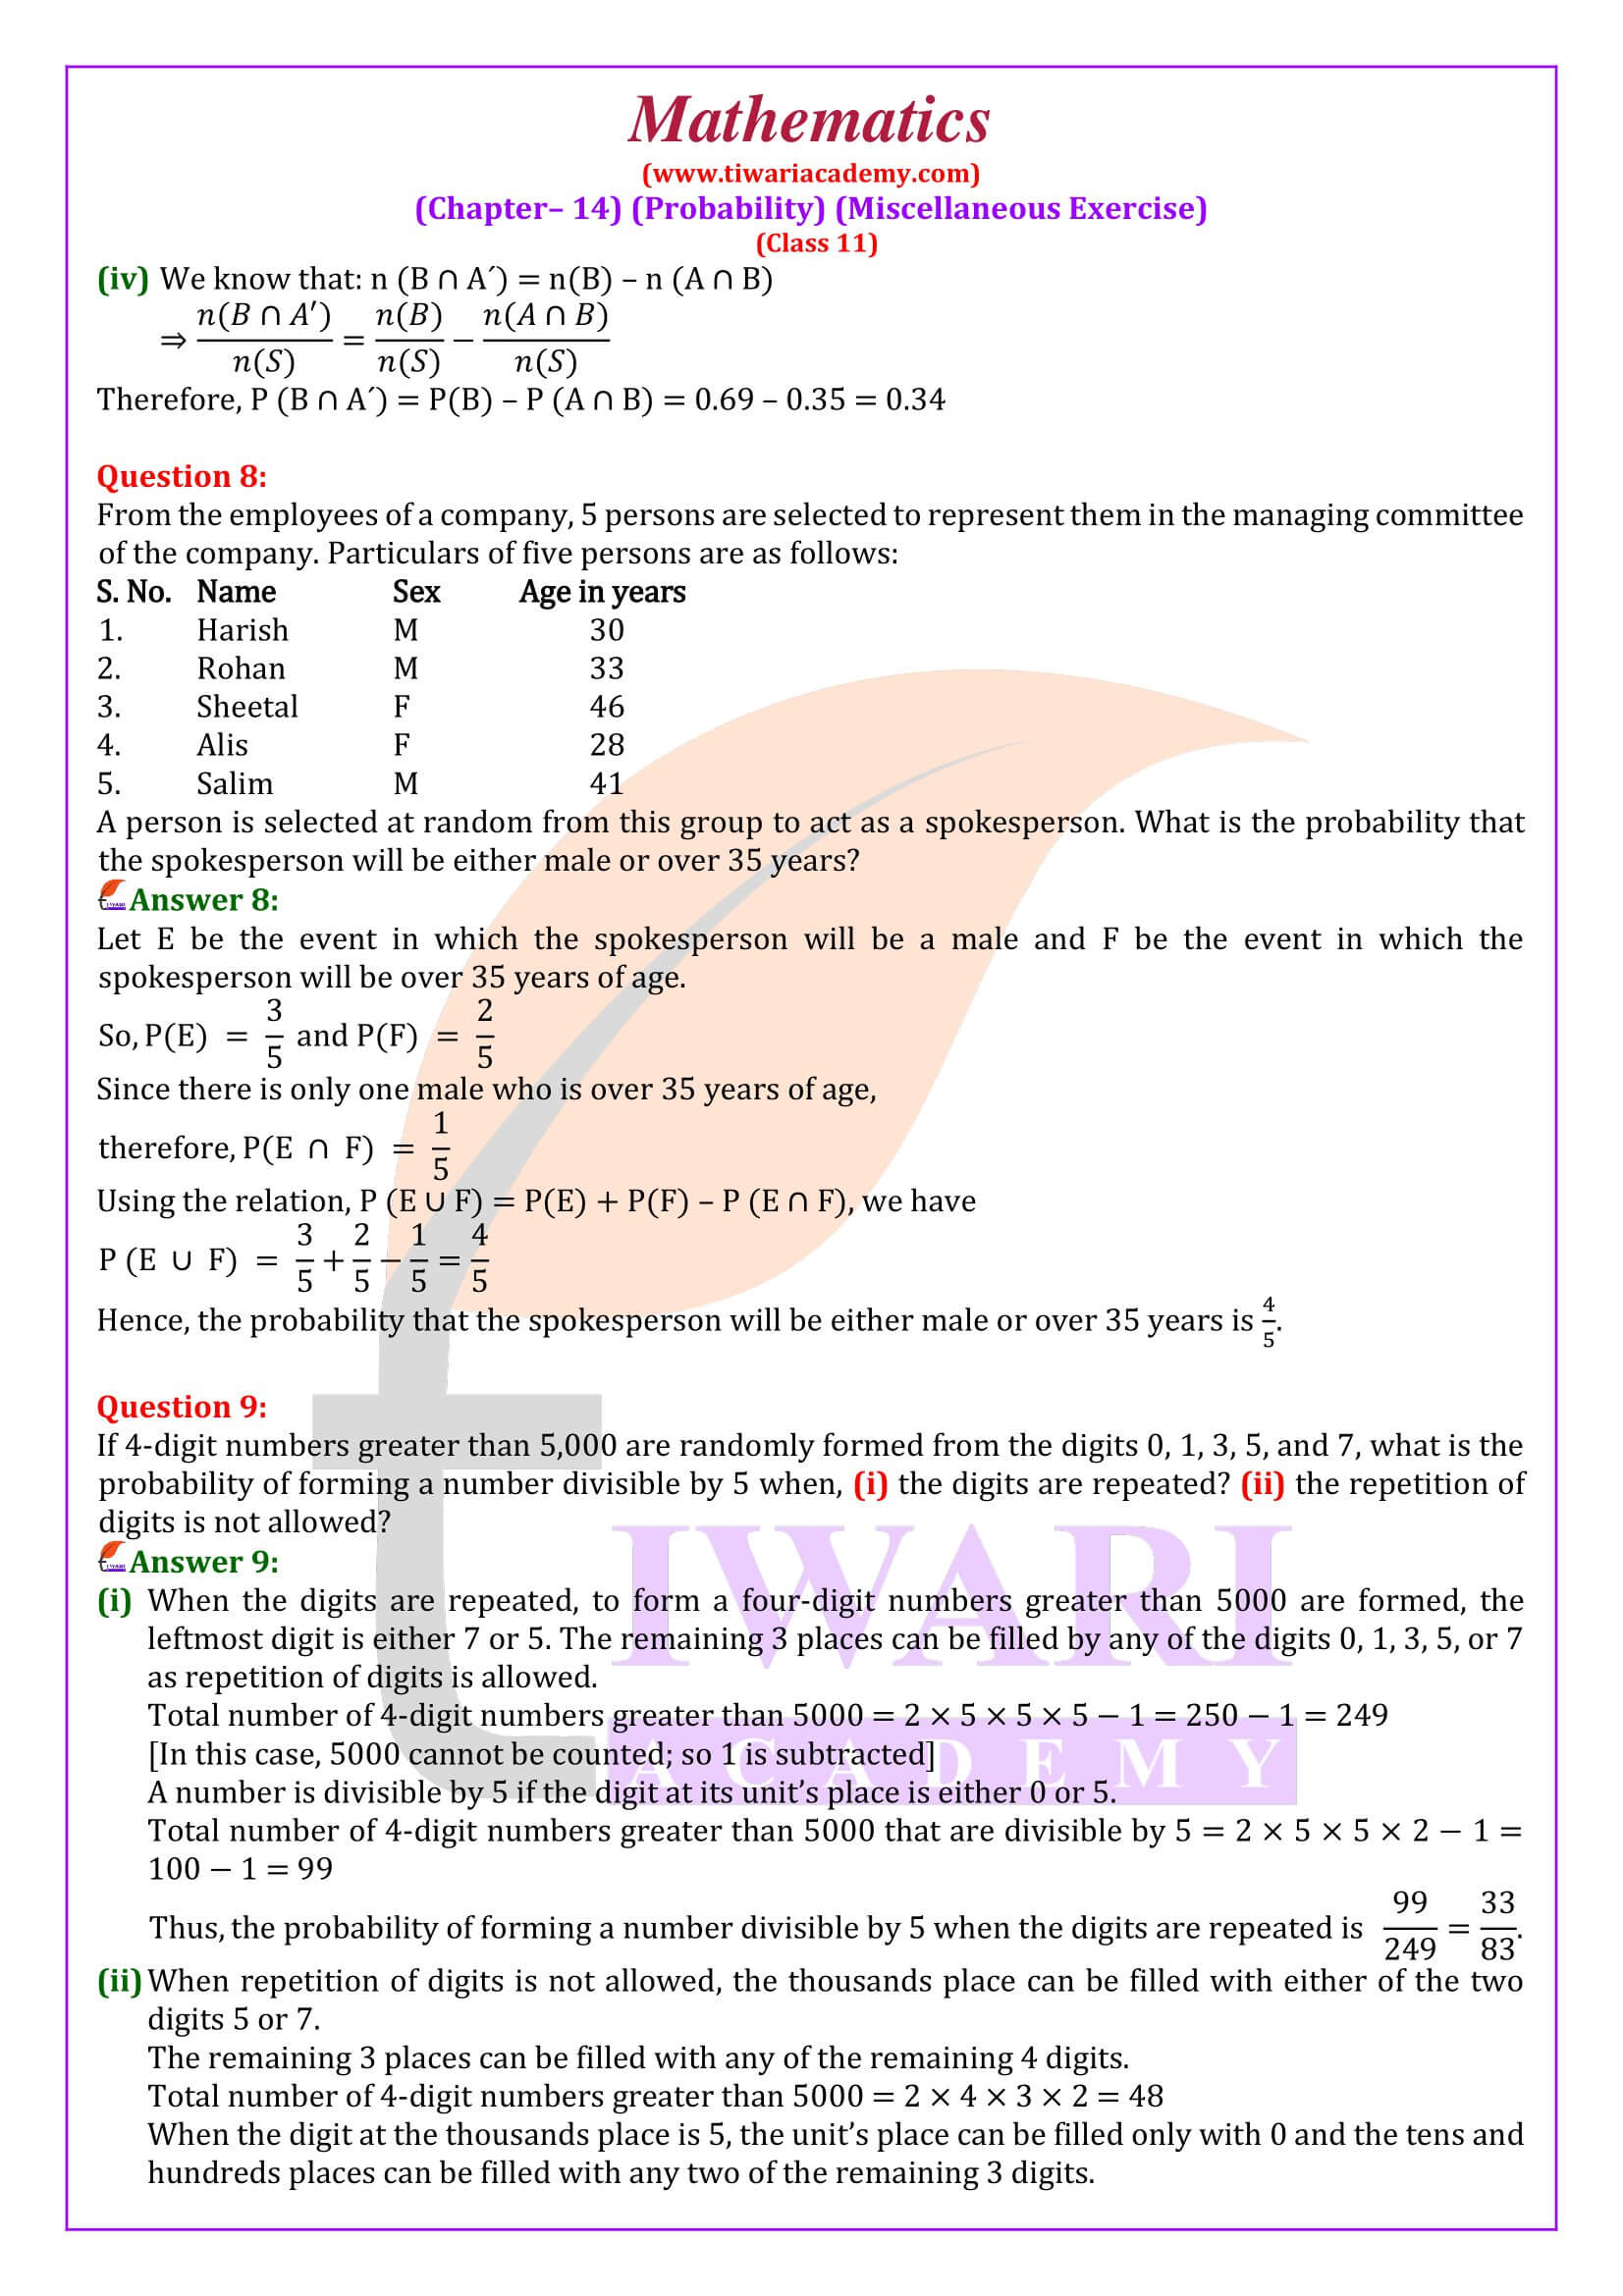 Class 11 Maths Chapter 14 Miscellaneous Exercise Solutions